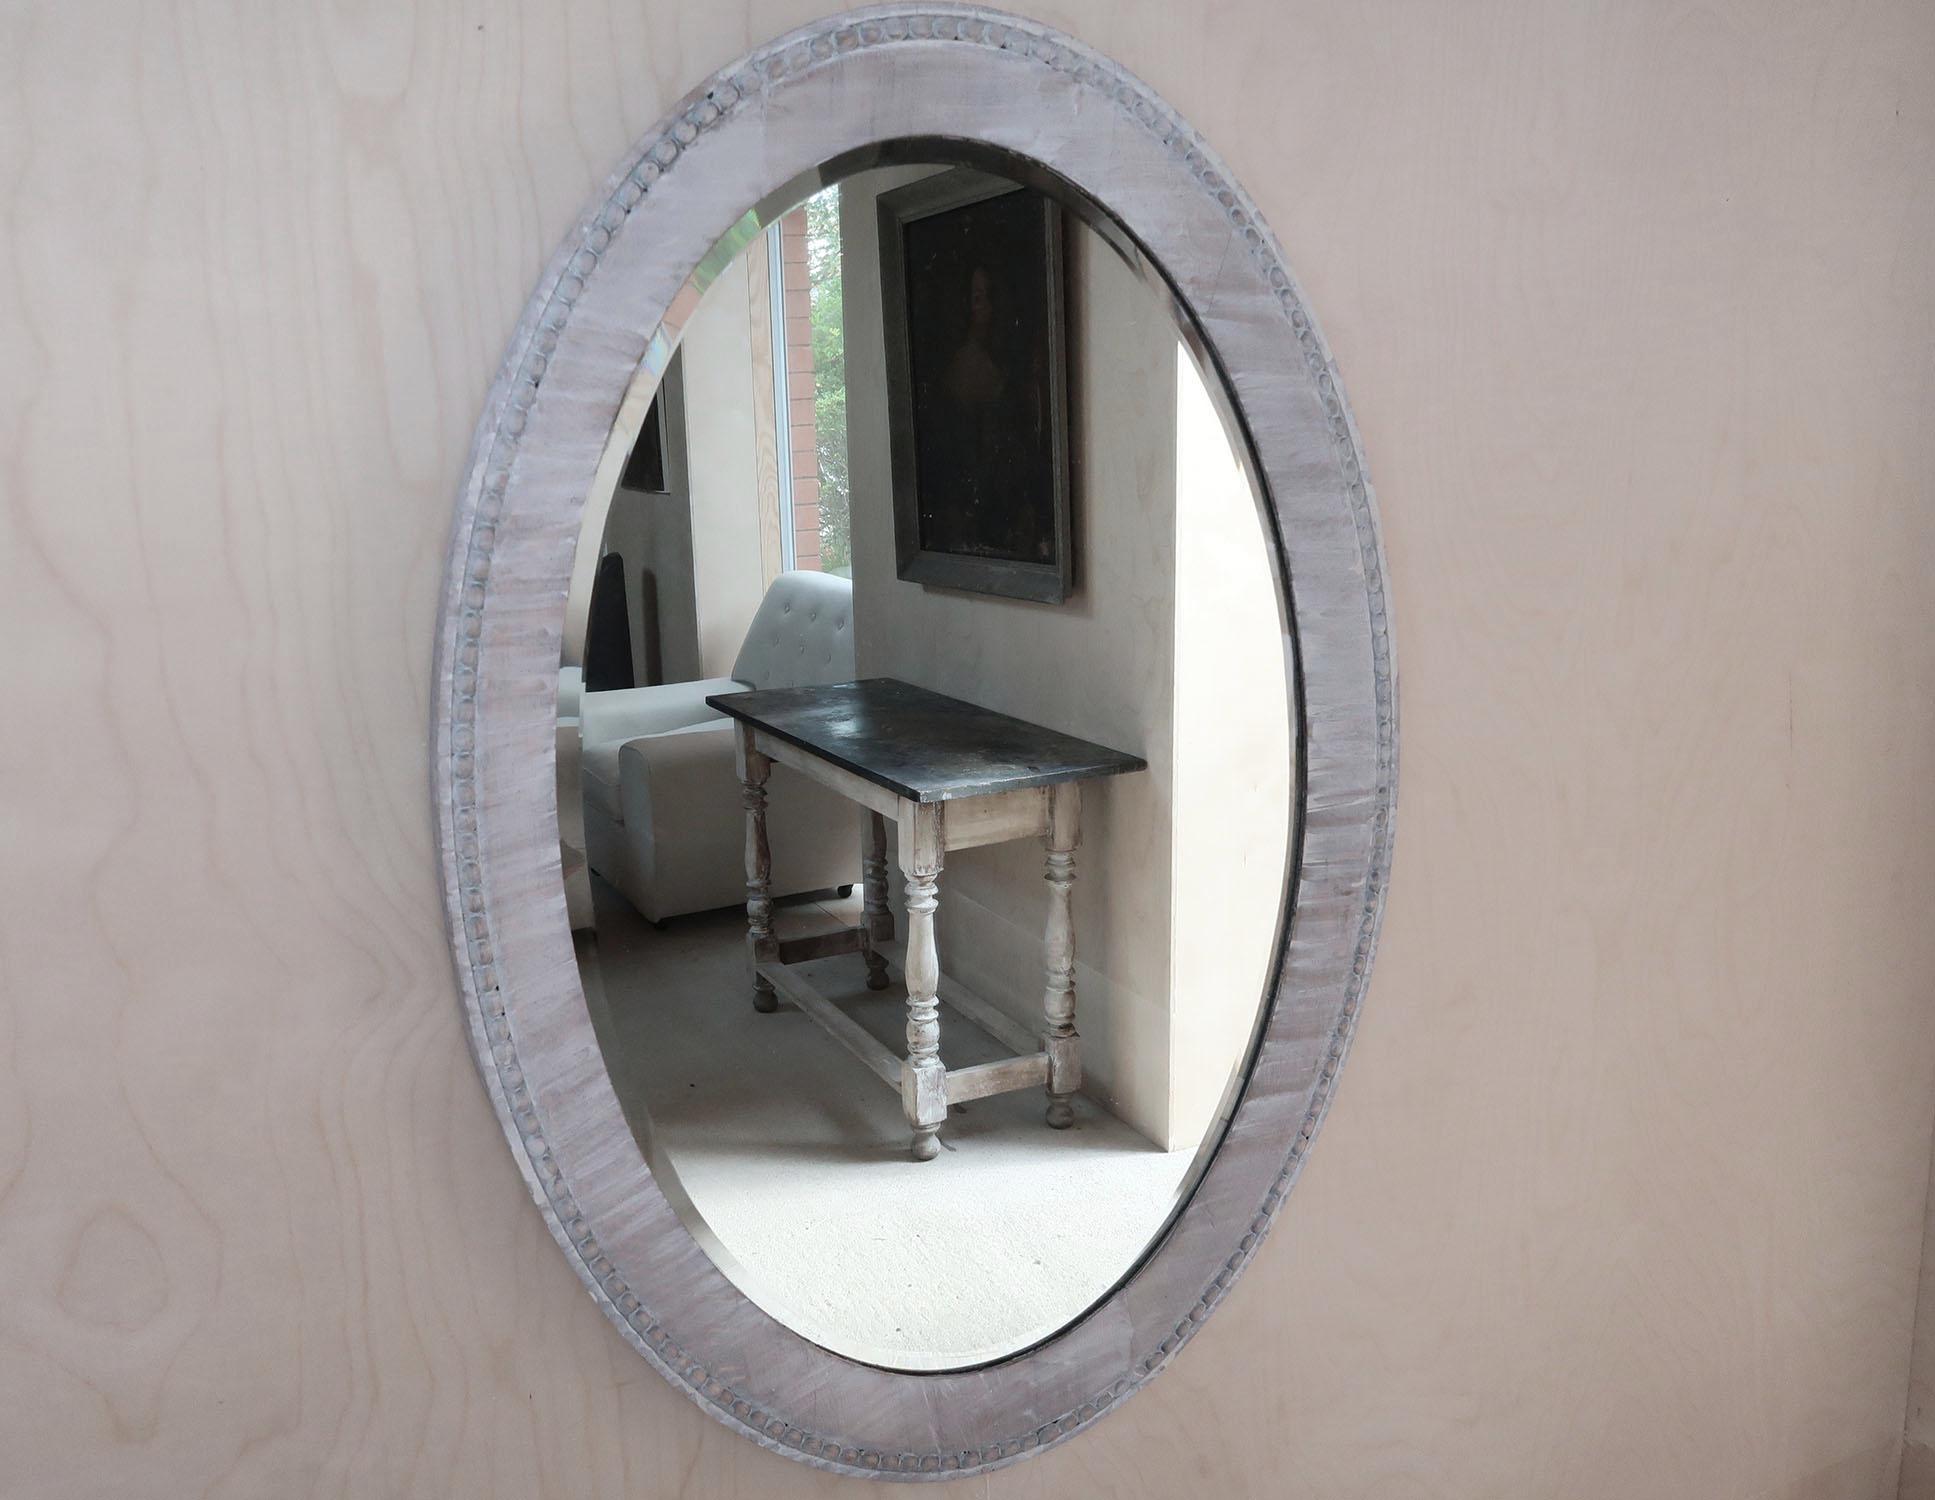 Lovely limed oak mirror

Very simple with just the rather nice gadrooned edge to the frame

In baroque style 

Recently limed.

Original bevelled mirror

Free UK delivery